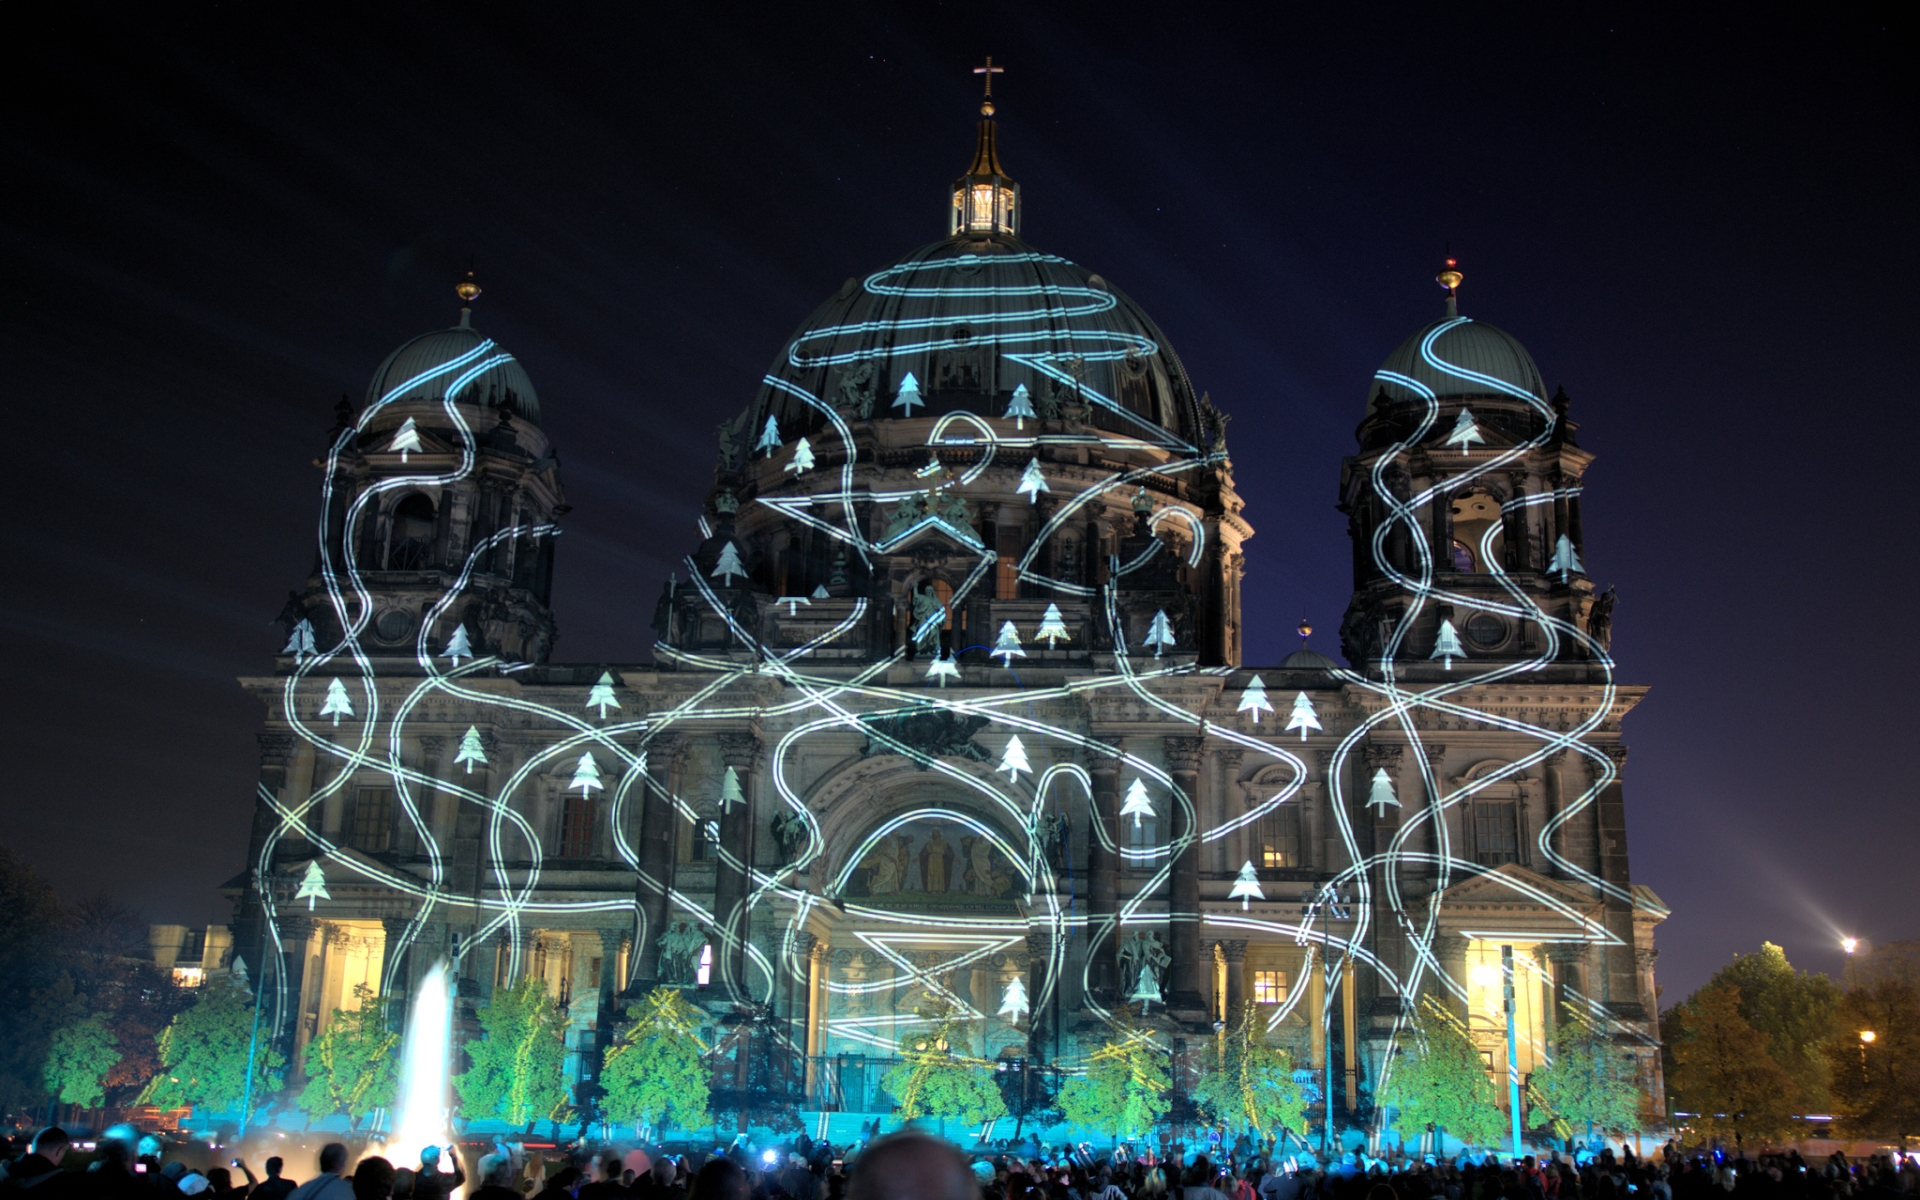 The Berlin Festival of Lights event The Golden Scope